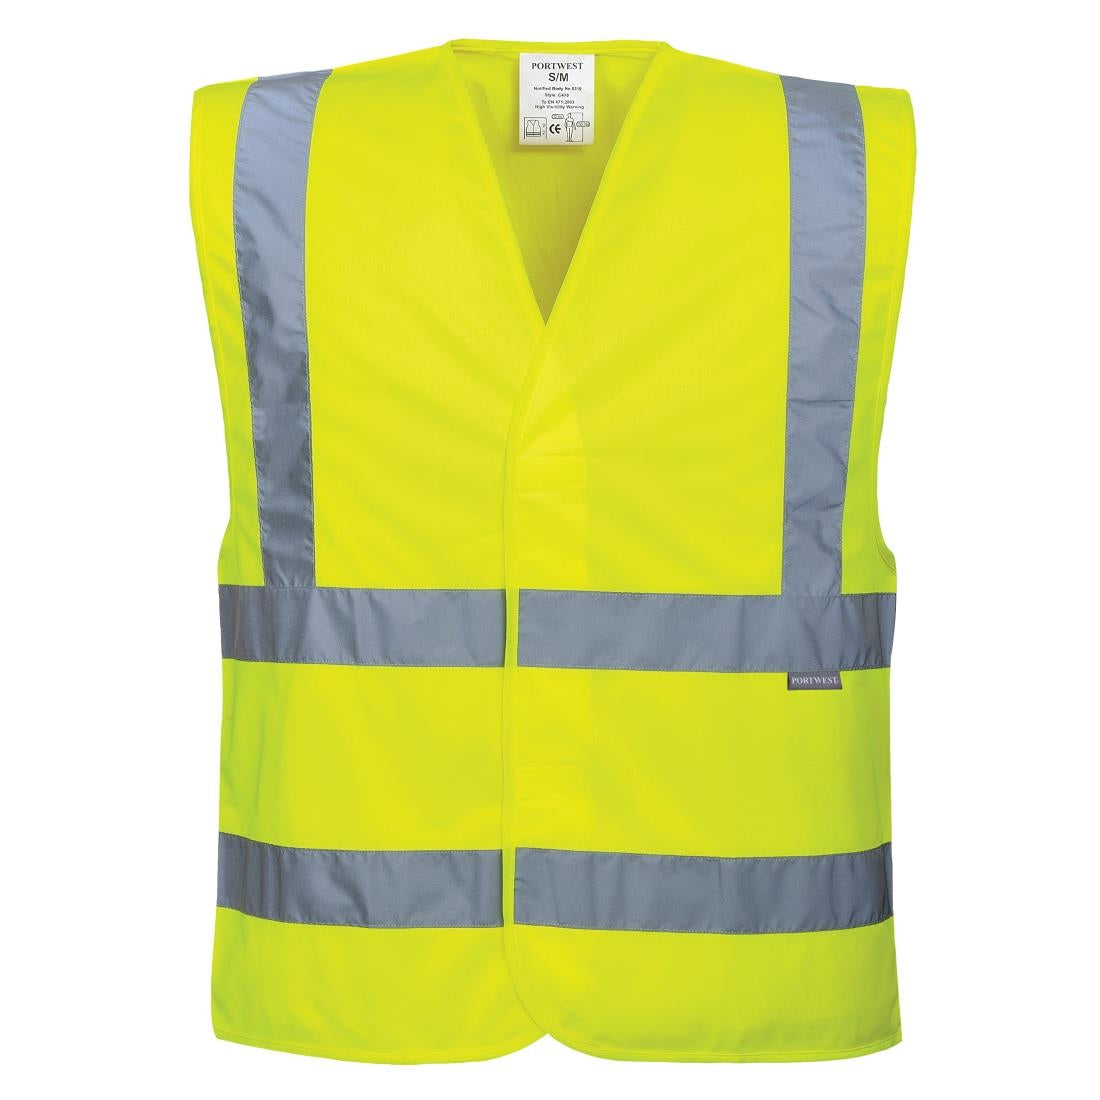 BB736-SM HiVis Two Band and Brace Vest Size S-M JD Catering Equipment Solutions Ltd